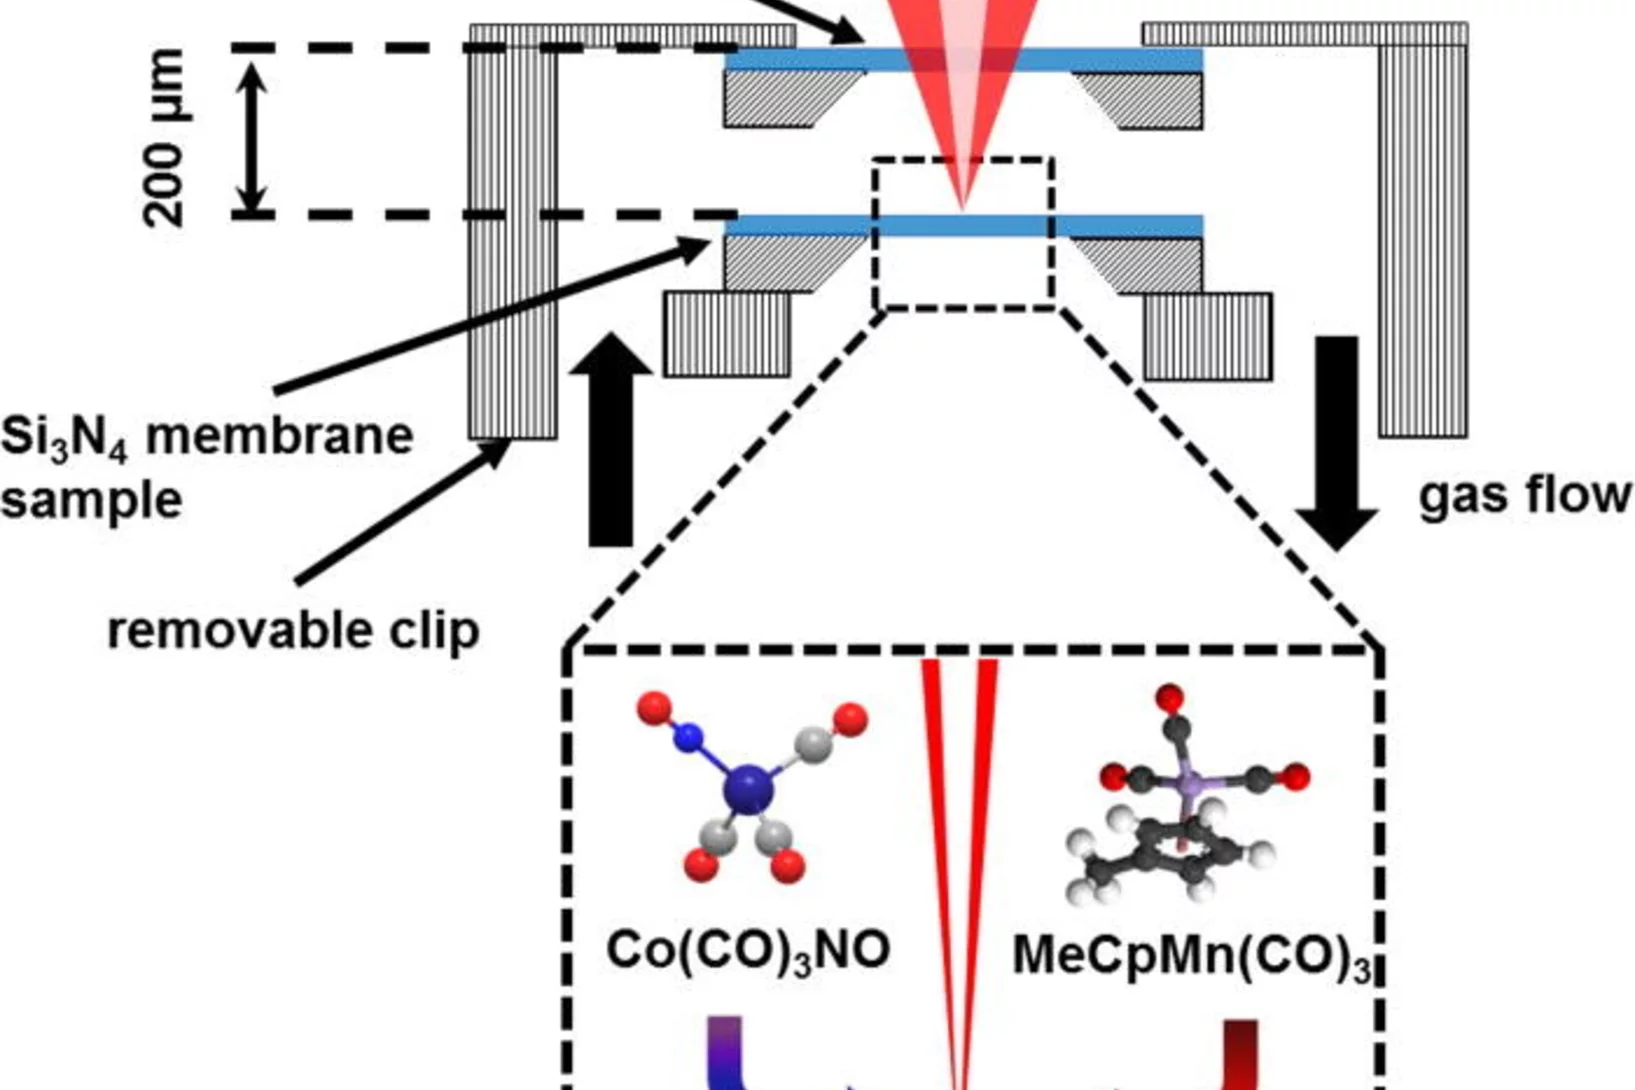 Scheme of the PolLux-STXM gas cell setup to realize precursor molecule flowing on 50 nm Si3N4 membrane surface and further in situ characterization. Two precursors were used in our experiments with metal ions in the center of the molecule: Co(CO)3NO and MeCpMn(CO)3.